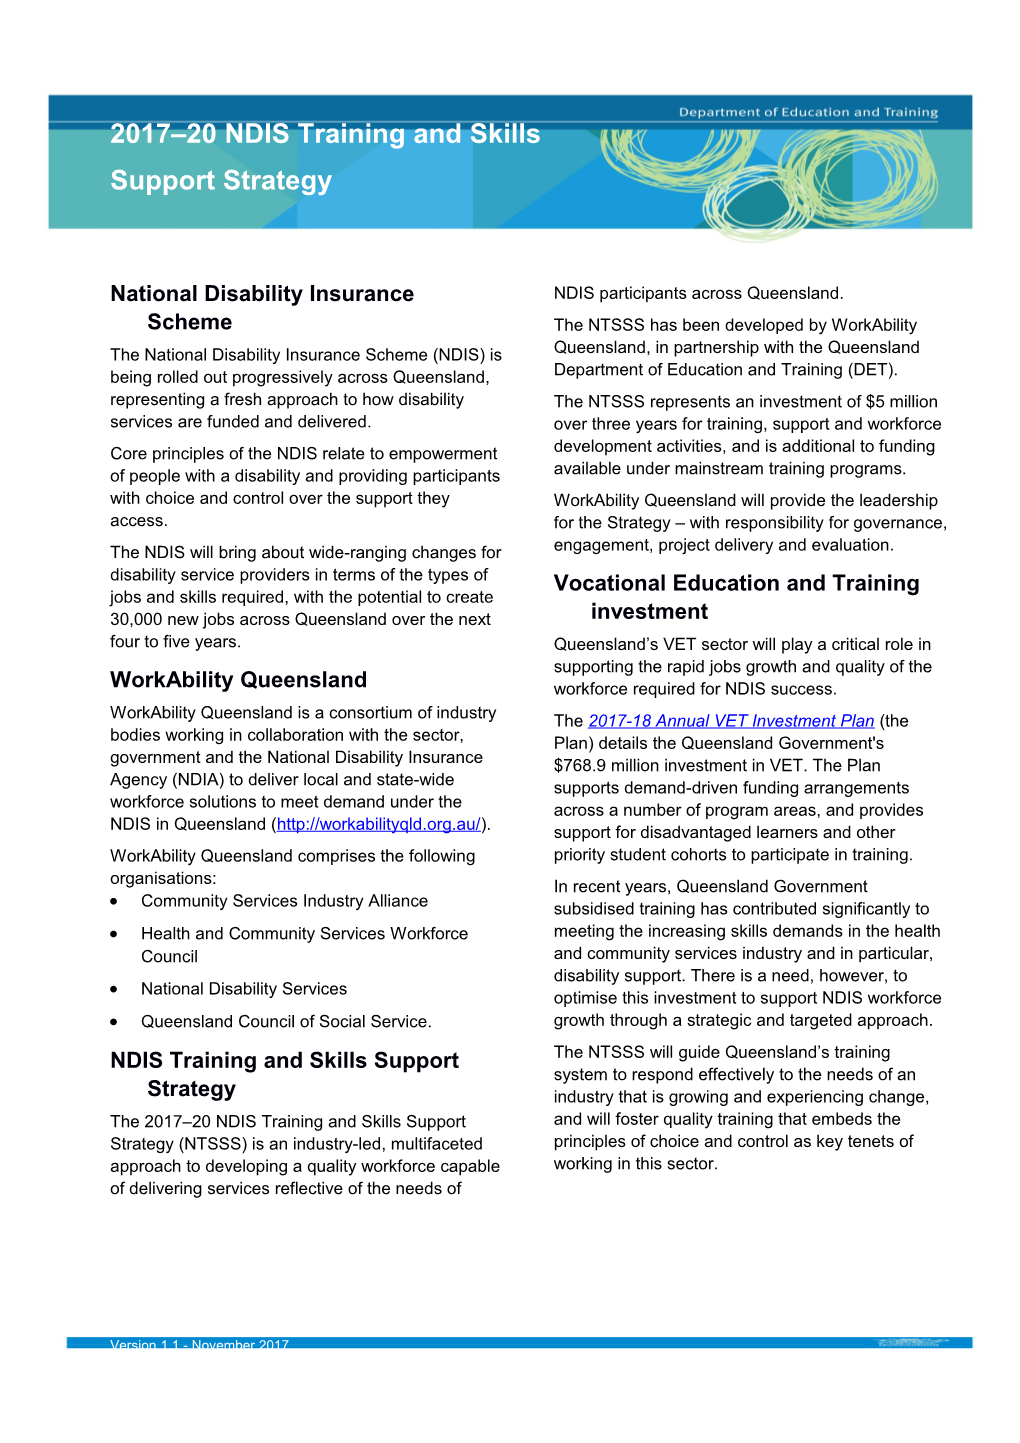 2017-20 NDIS Training and Skills Support Strategy Fact Sheet